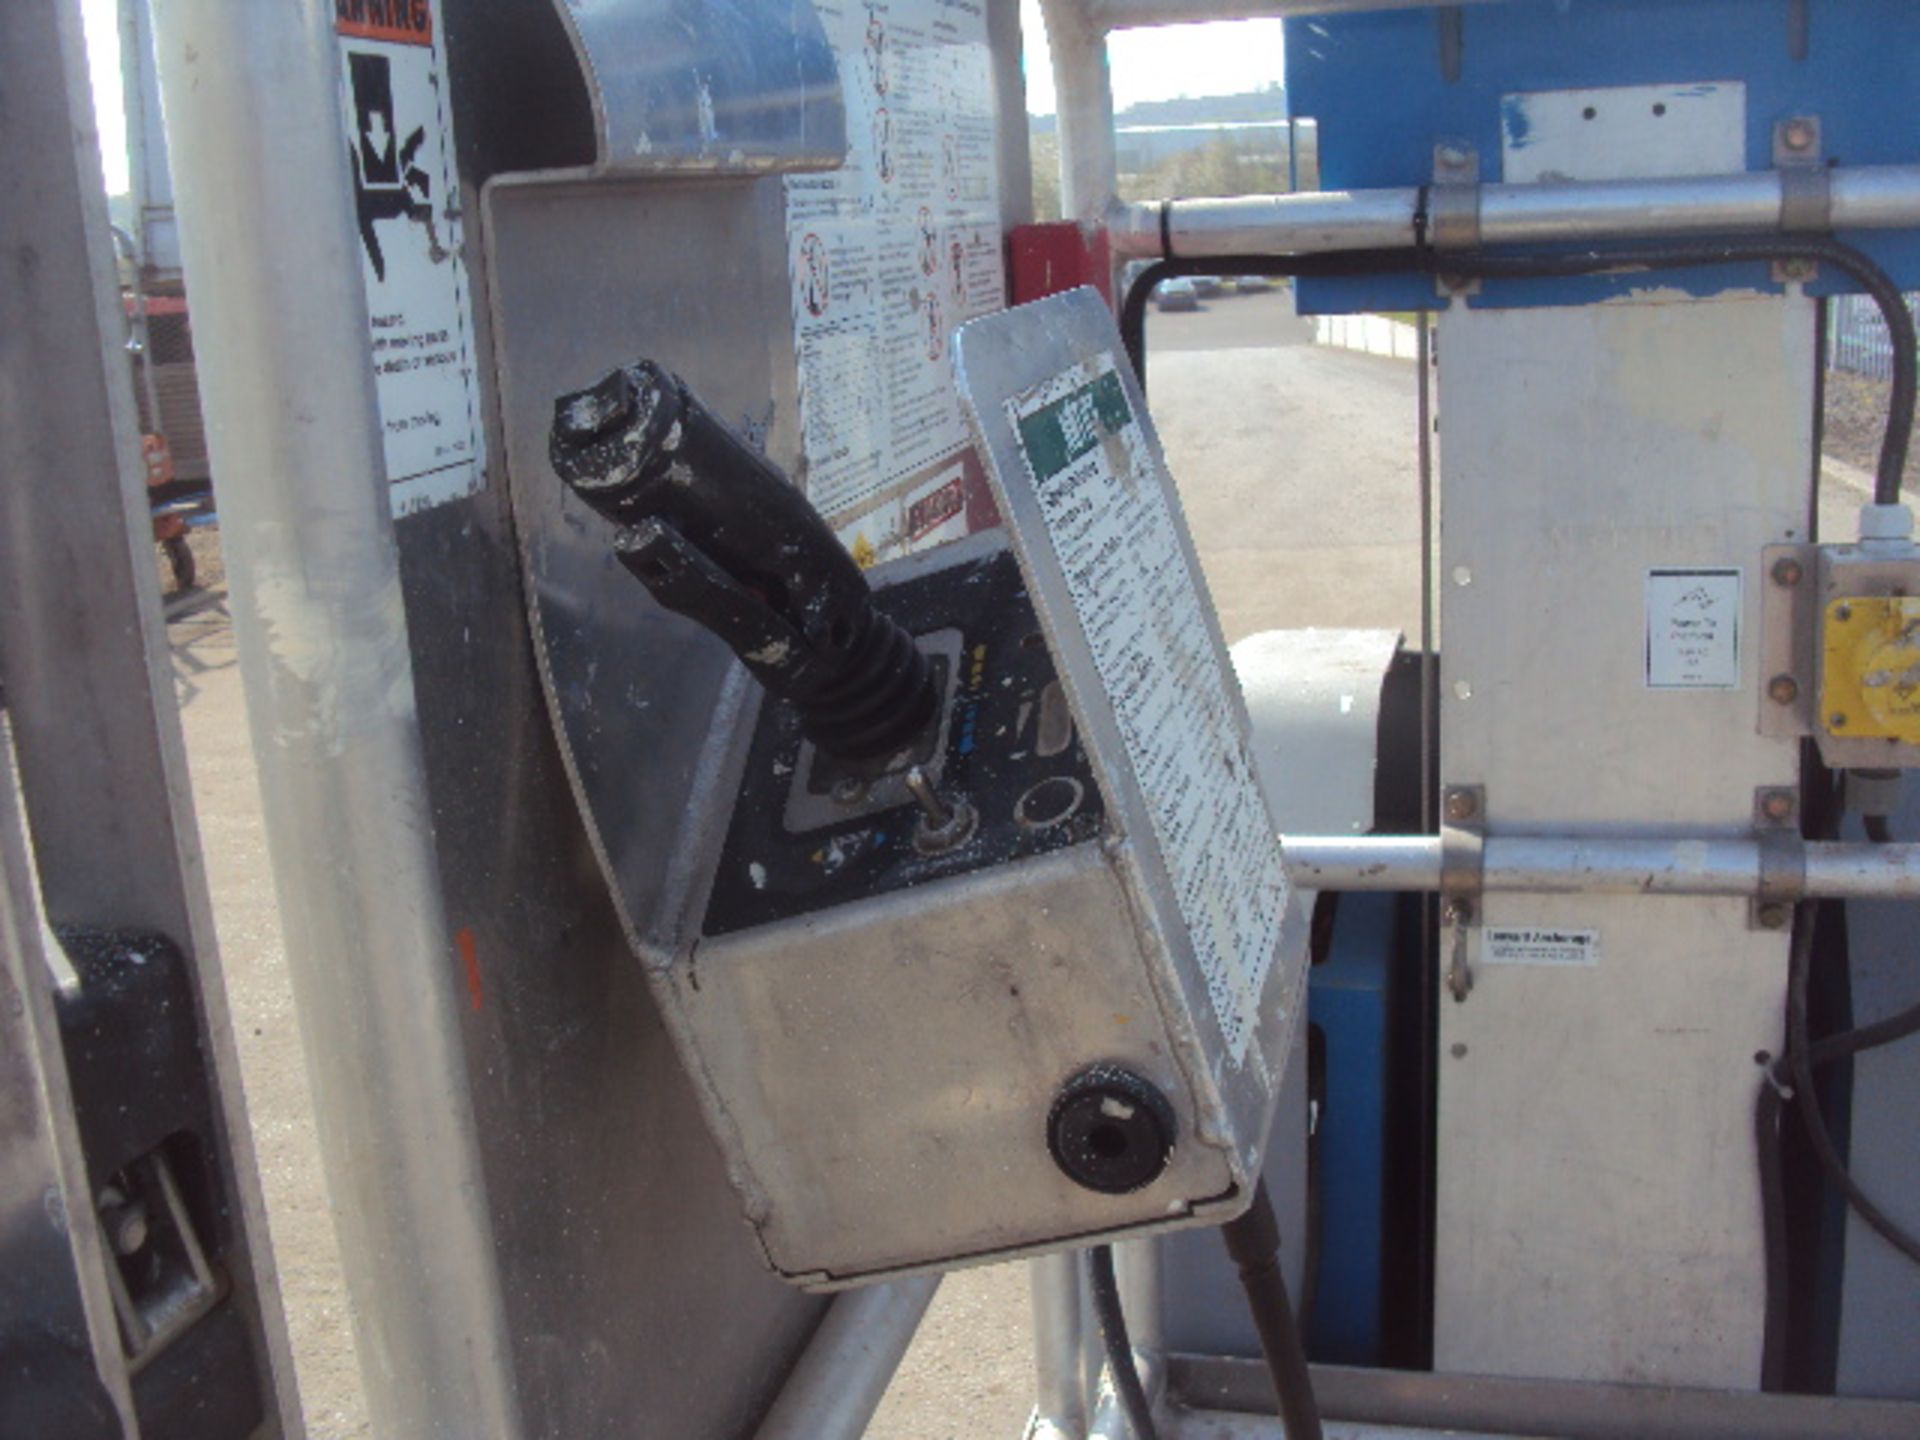 2001 GENIE GR15 Runabout battery driven vertical man-lift (RDL) - Image 3 of 6